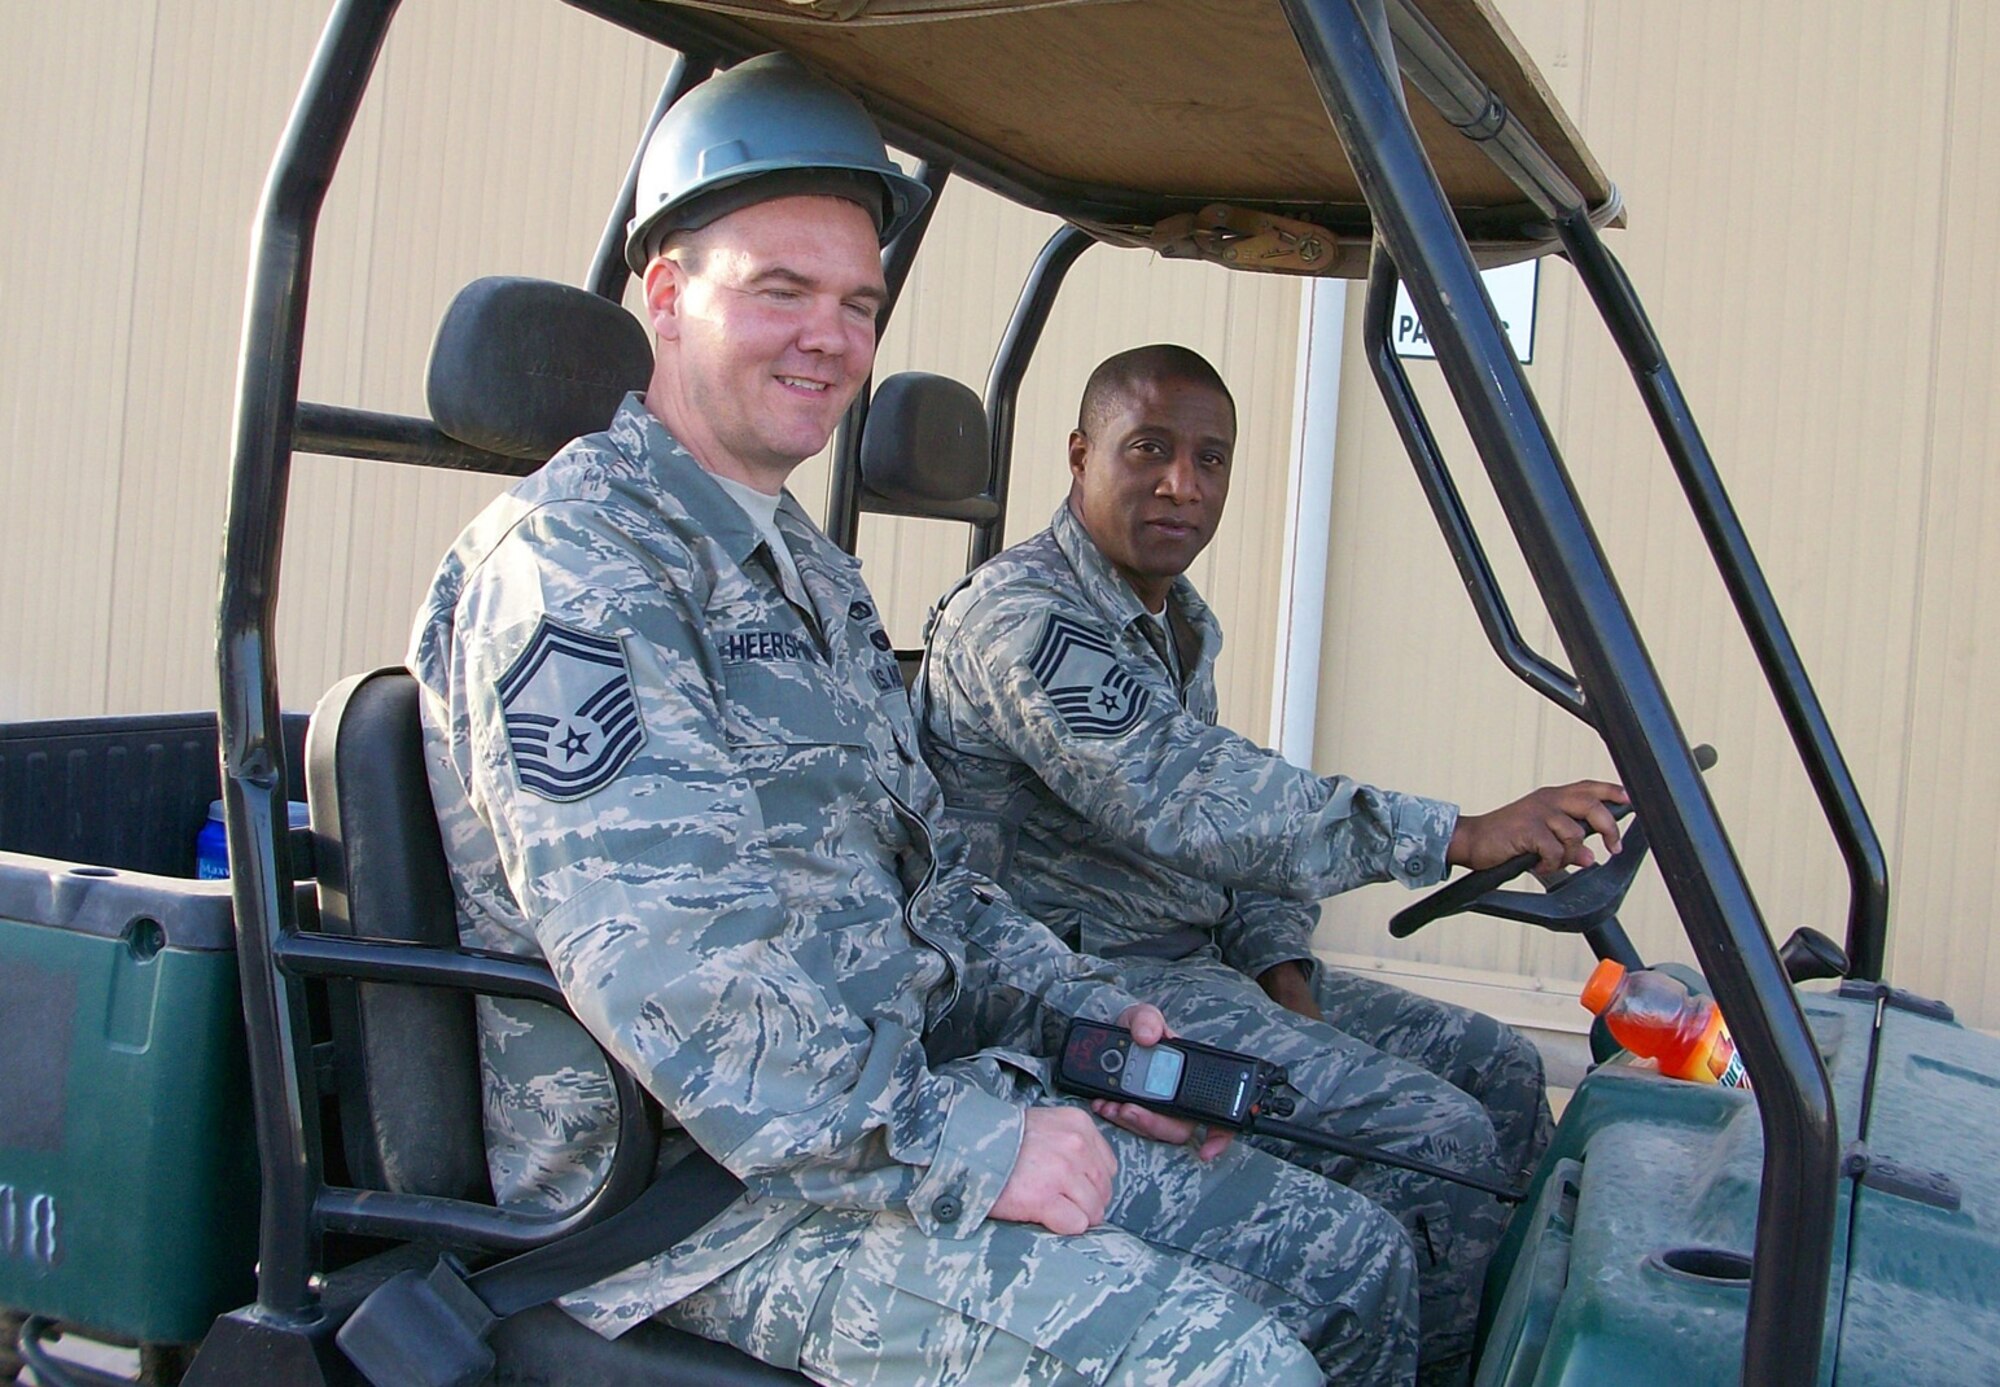 Senior Master Sgt. Franklin Heerspink, left, and Chief Master Sgt. Arthur Green, both with the 36th Aerial Port Squadron, McChord Air Force Base, Wash., perform a yard check on all of the aerial port's areas of responsibility while deployed at Balad Air Base, Iraq. The 86th and 36th Aerial Port Squadrons were deployed December 2008 to May 2009. (U.S. Air Force photo/Master Sgt. Denise White) 